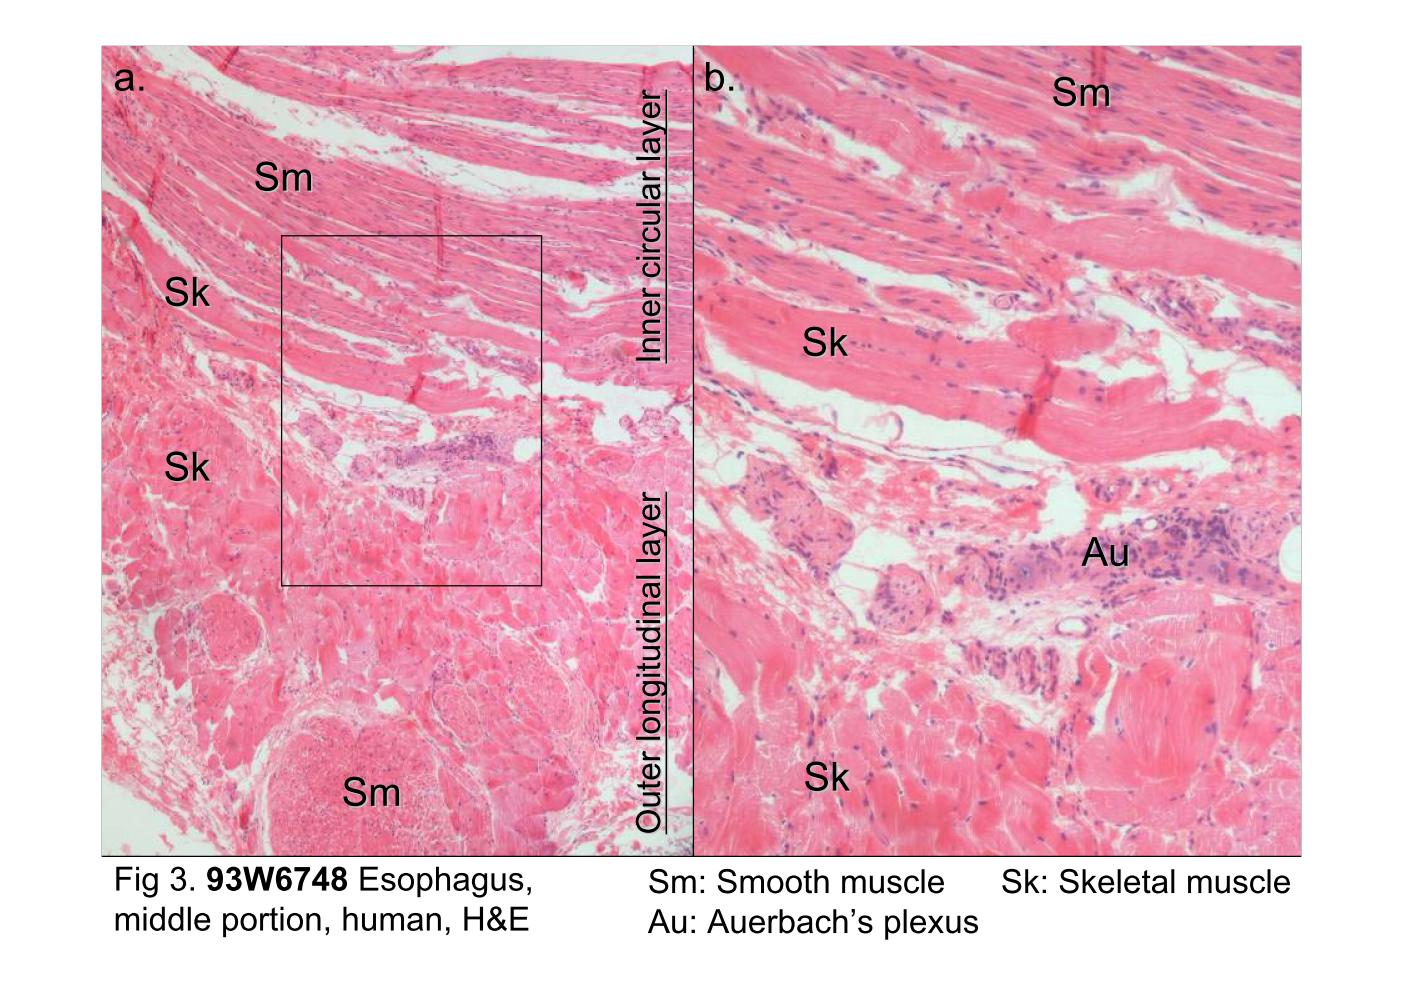 block10-1_09.jpg - Fig 3. The microscopic structure of the muscularis externaof the esophagus.The muscularis externa consists of two muscle layers, an innercircular layer and an outer longitudinal layer. The esophagus isdivided histologically into three regions on the basis of the typeof muscle which muscularis externa contains. At the middle thirdof the esophagus, skeletal muscle (Sk) and smooth muscle (Sm)bundles are mixed and interwoven in the muscularis externa.Located between the two muscle layers is a thin connectivetissue layer. Within this connective tissue lies the Auerbach'splexus (Au) containing nerve cell bodies of postganglionicparasympathetic neurons and neurons of the enteric nervoussystem, as well as blood vessels and lymphatic vessels. Therectangle of Fig 3a is examined at higher magnification in Fig 3b.